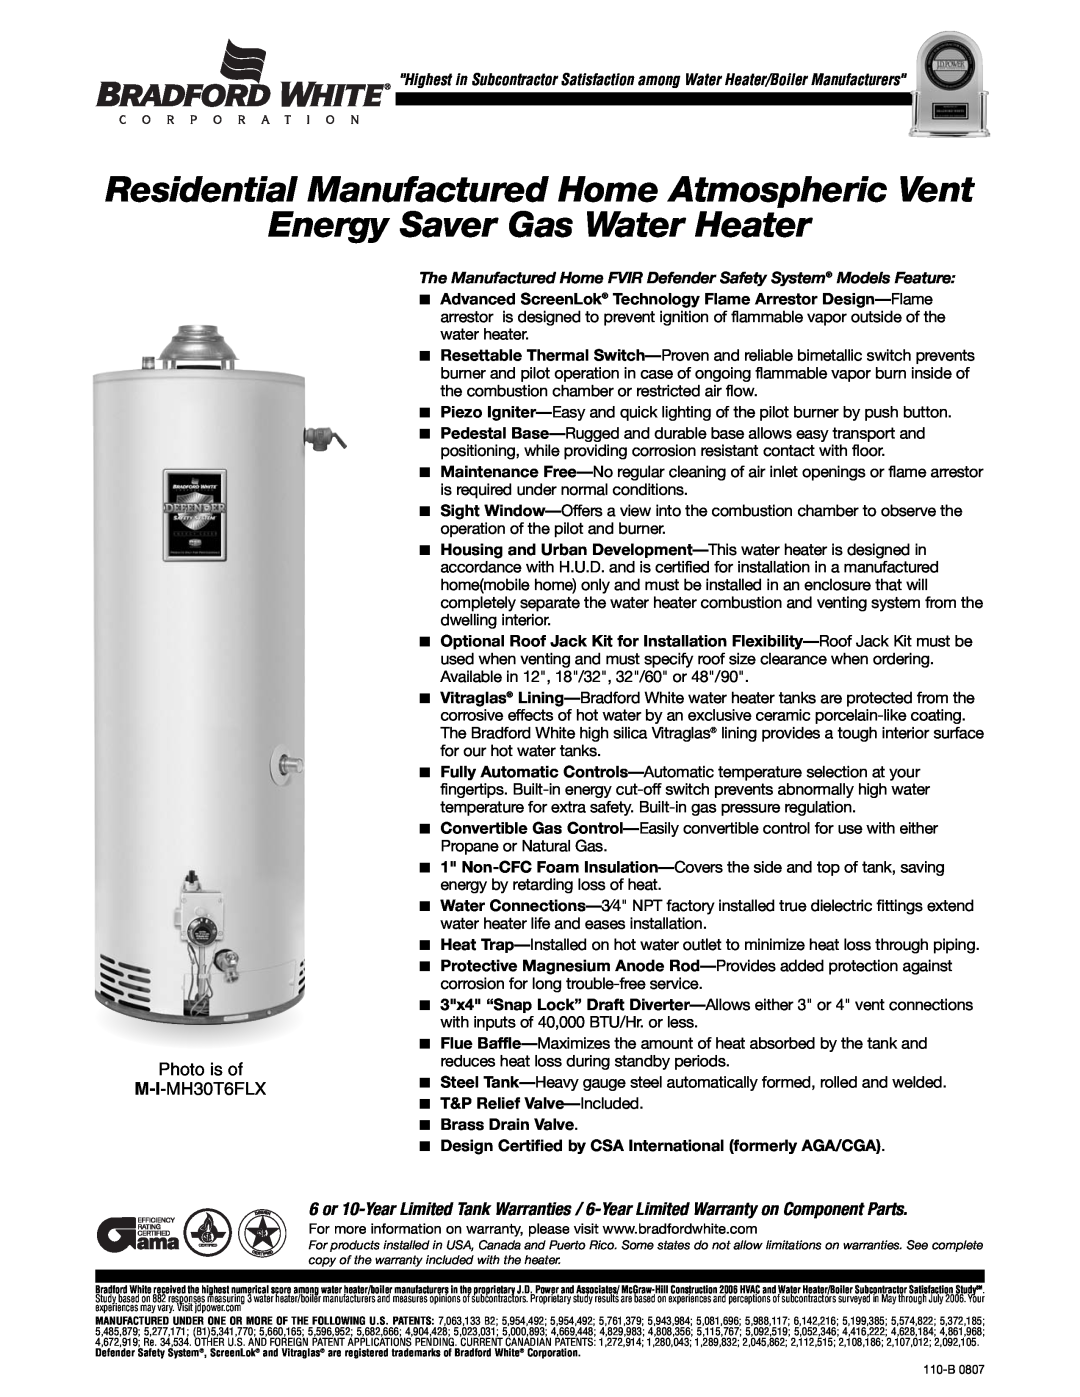 Bradford-White Corp M-I-MH30T6FLX warranty Residential Manufactured Home Atmospheric Vent, Energy Saver Gas Water Heater 